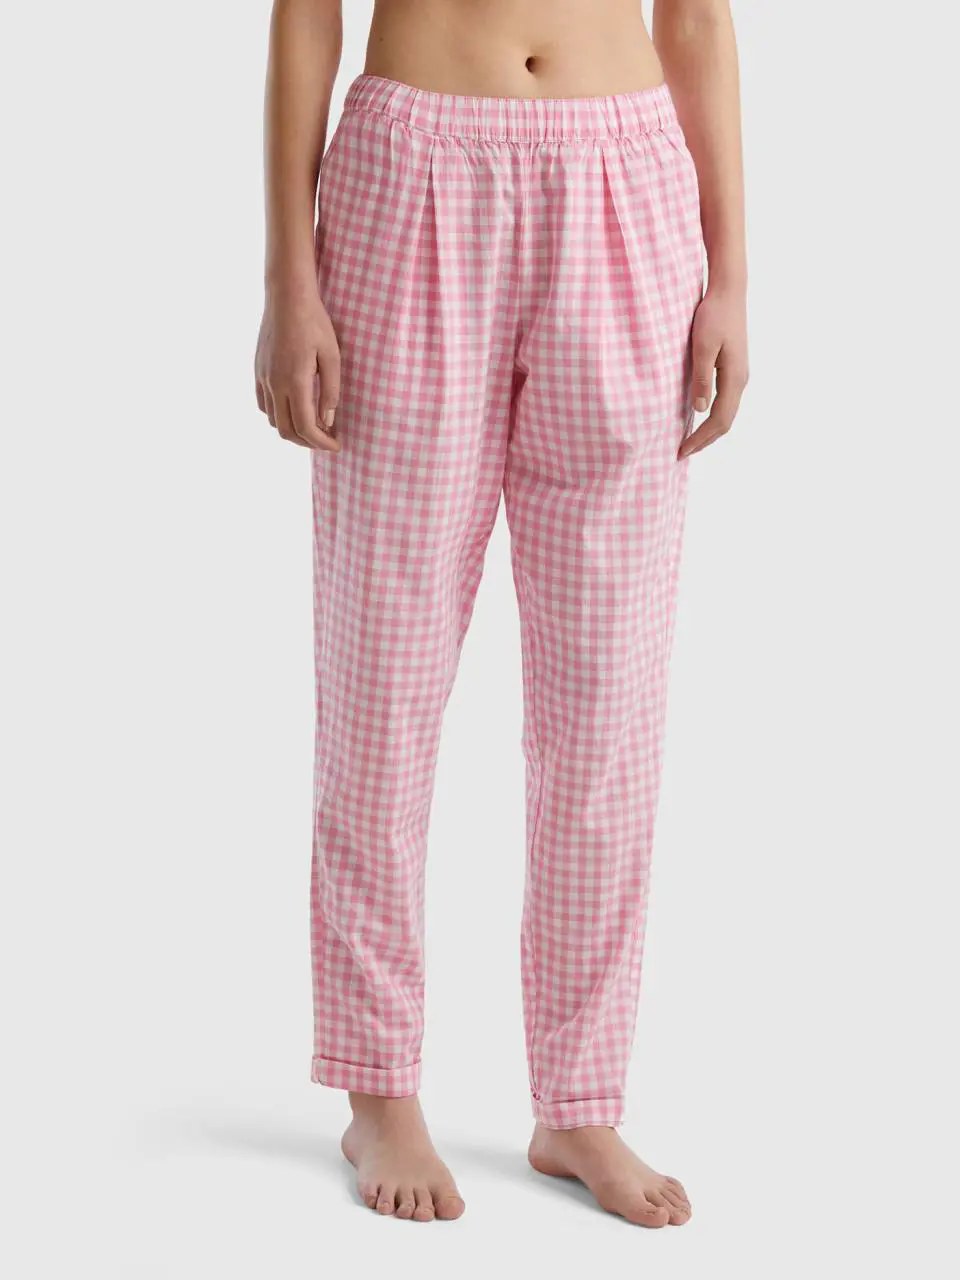 Benetton trousers with vichy check pattern. 1